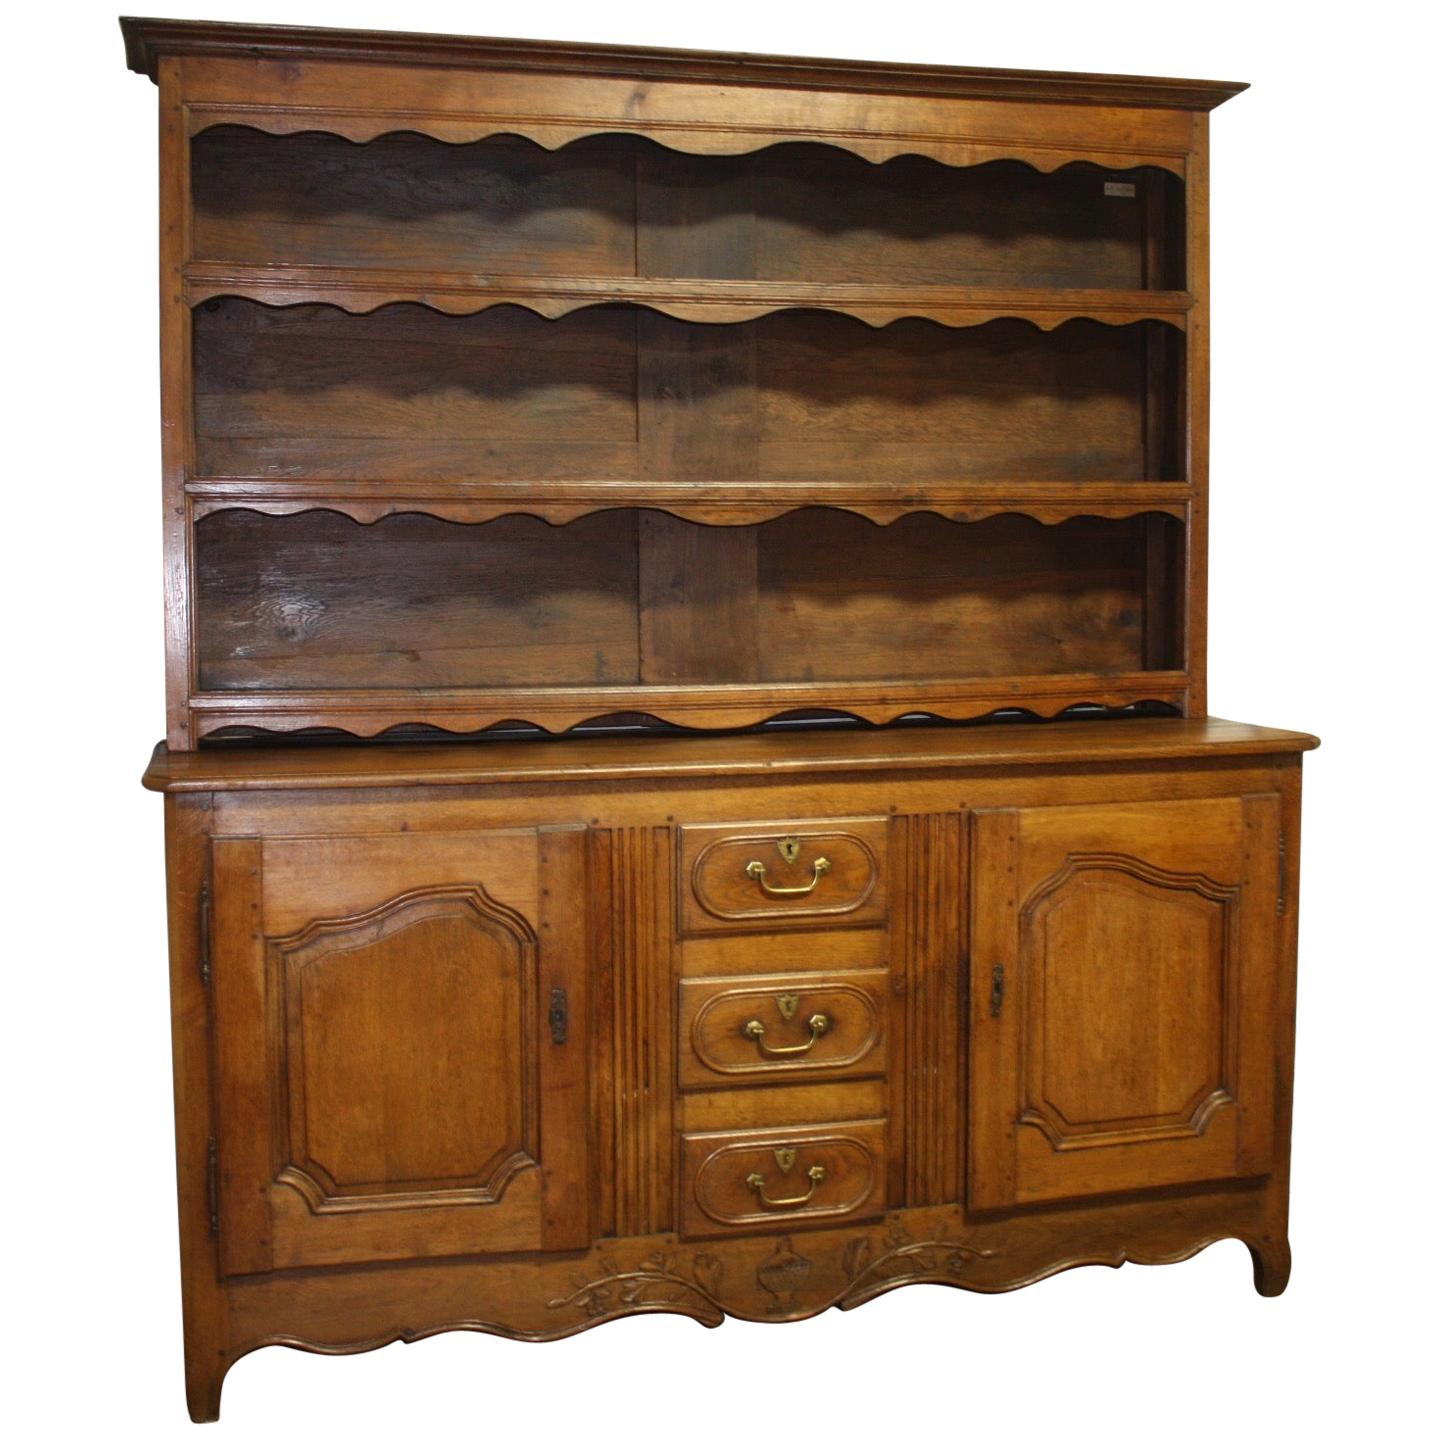 Outstanding 18th Century French Hutch